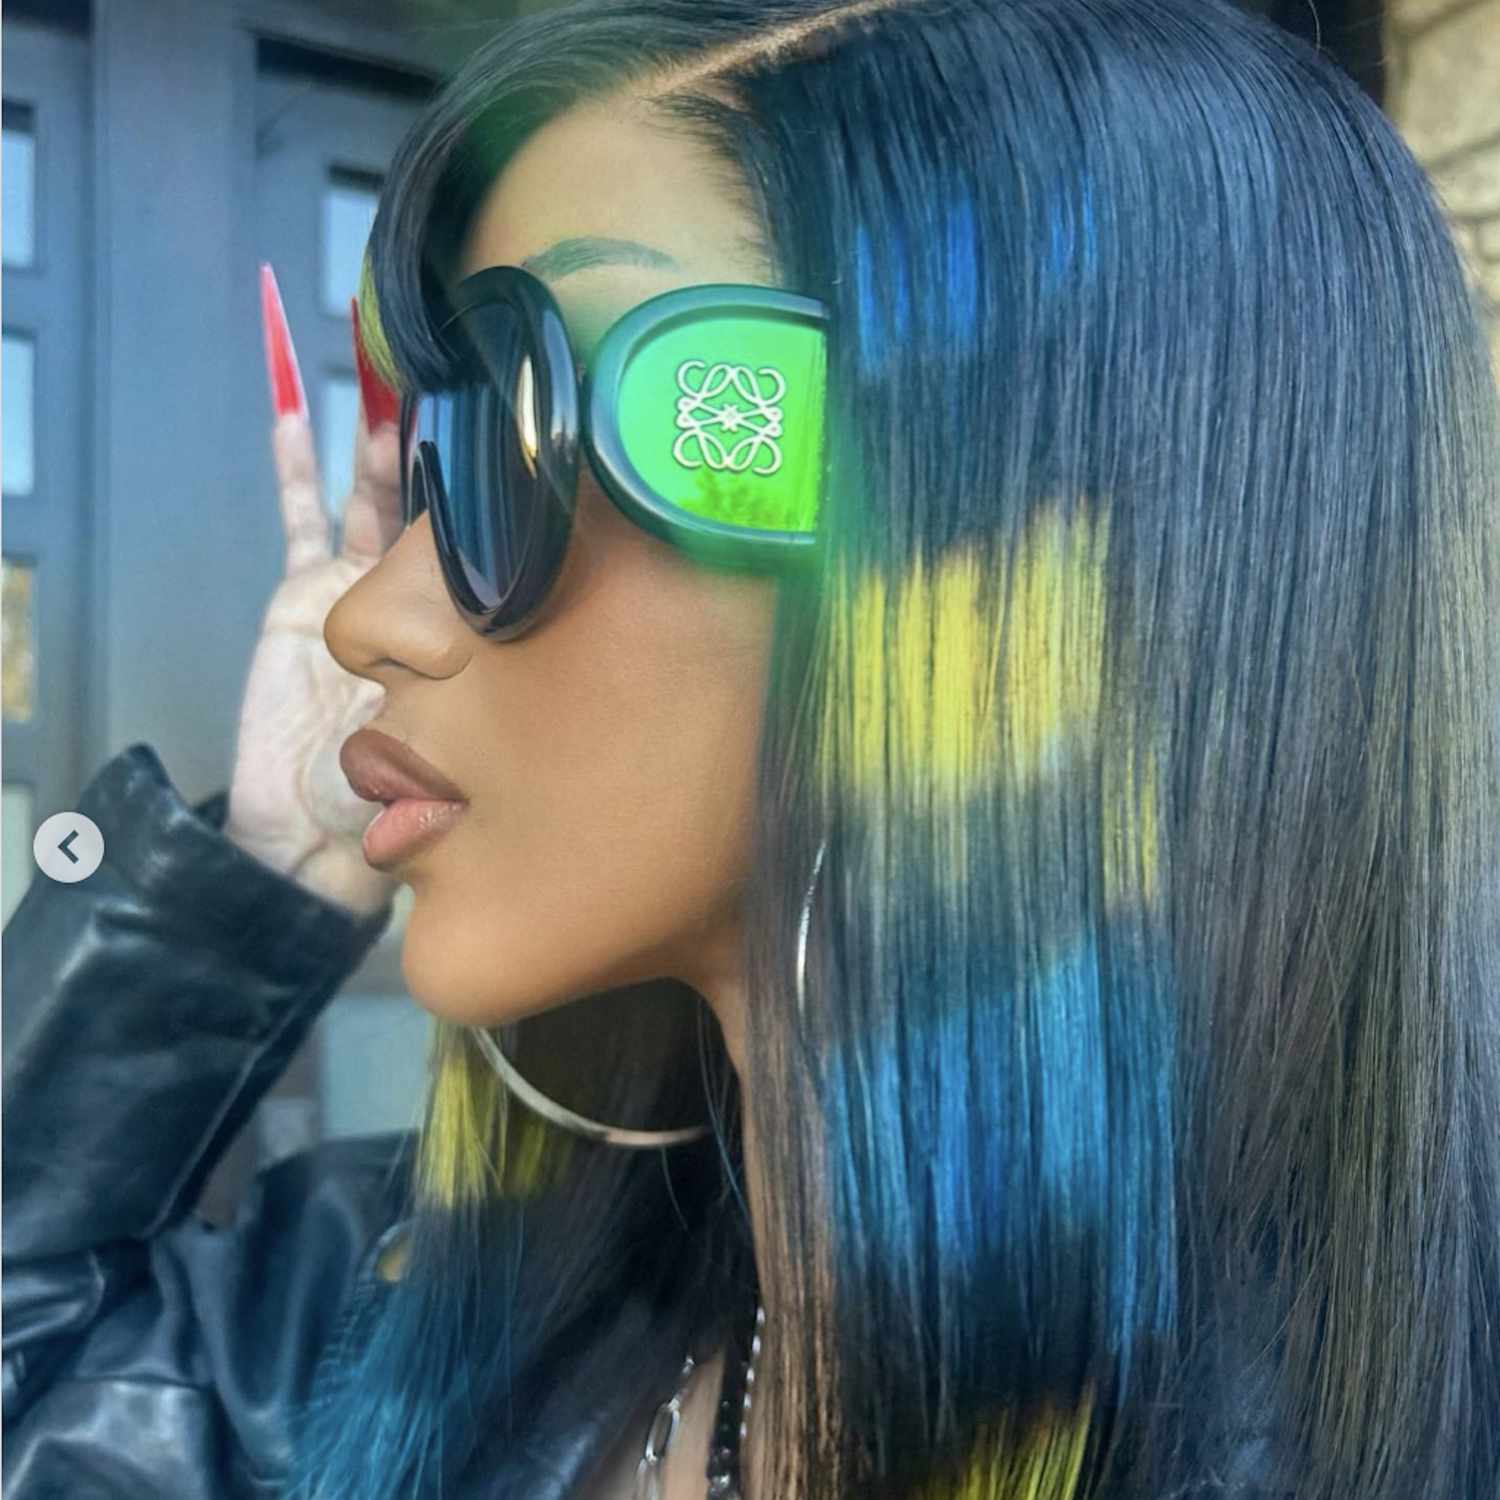 Cardi B with sleek black hair with green accents